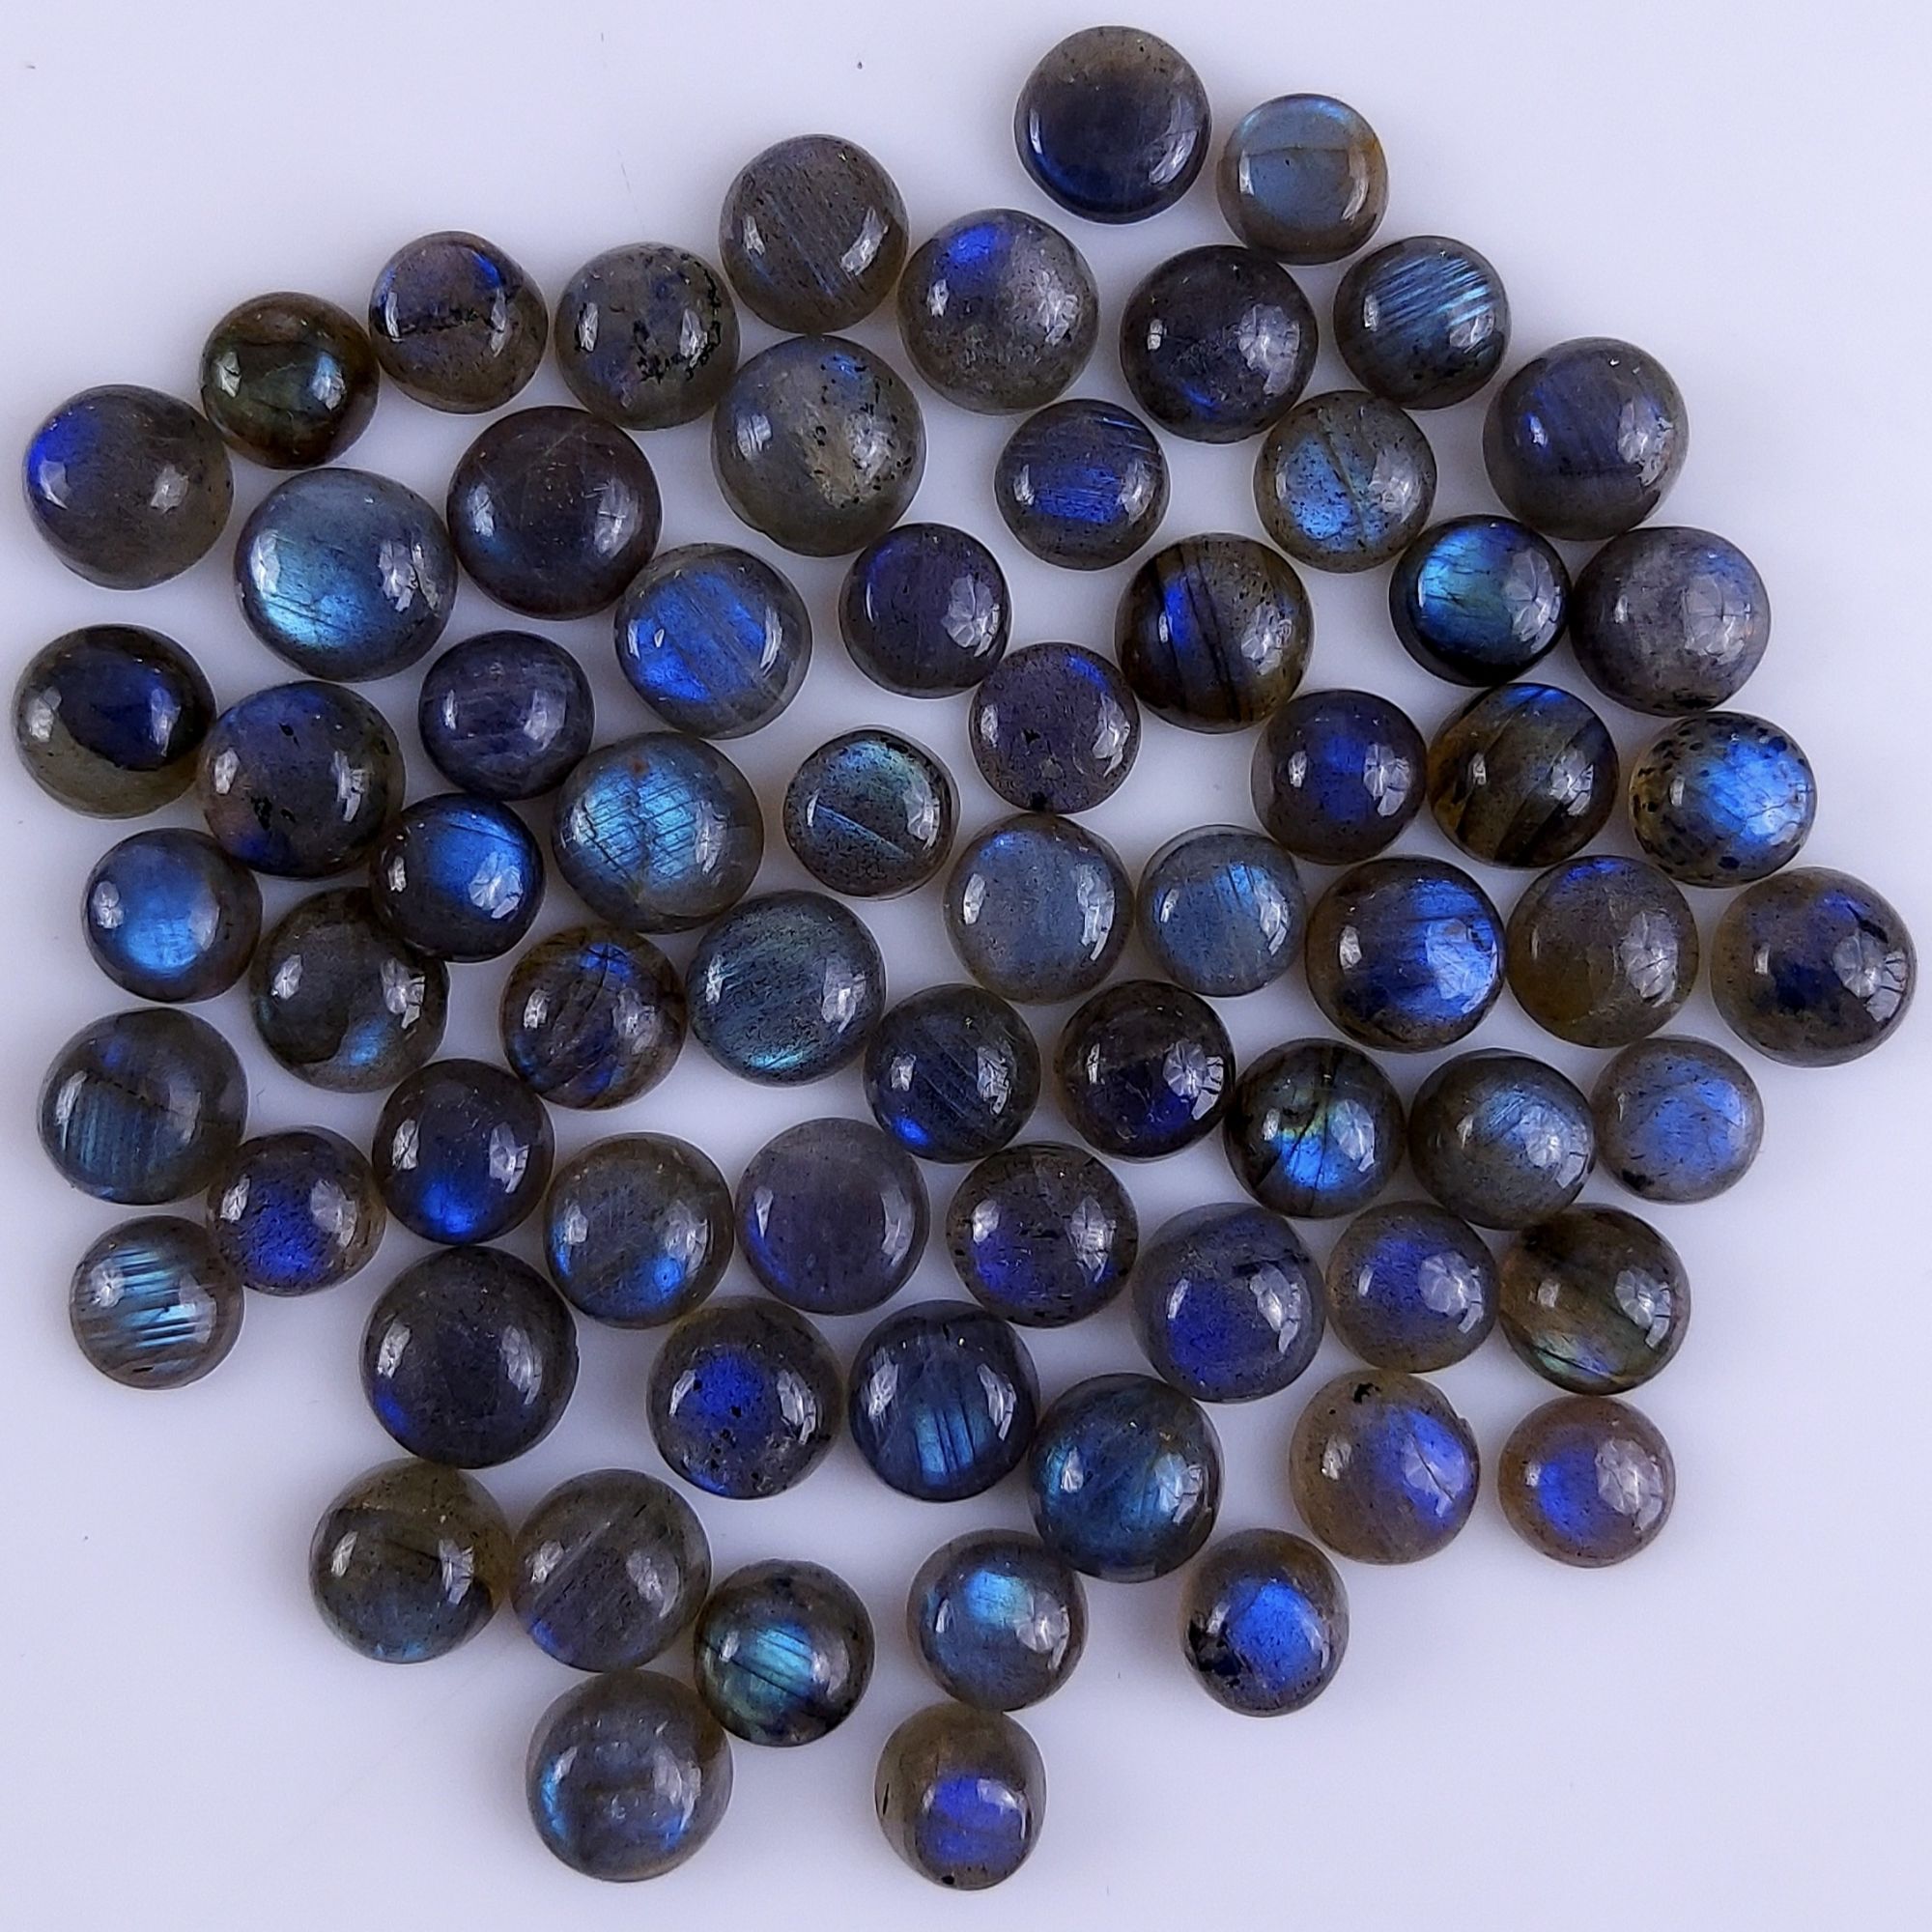 68Pcs 197Cts Natural Blue Labradorite Calibrated Cabochon Round Shape Gemstone Lot For Jewelry Making 5x5mm#756